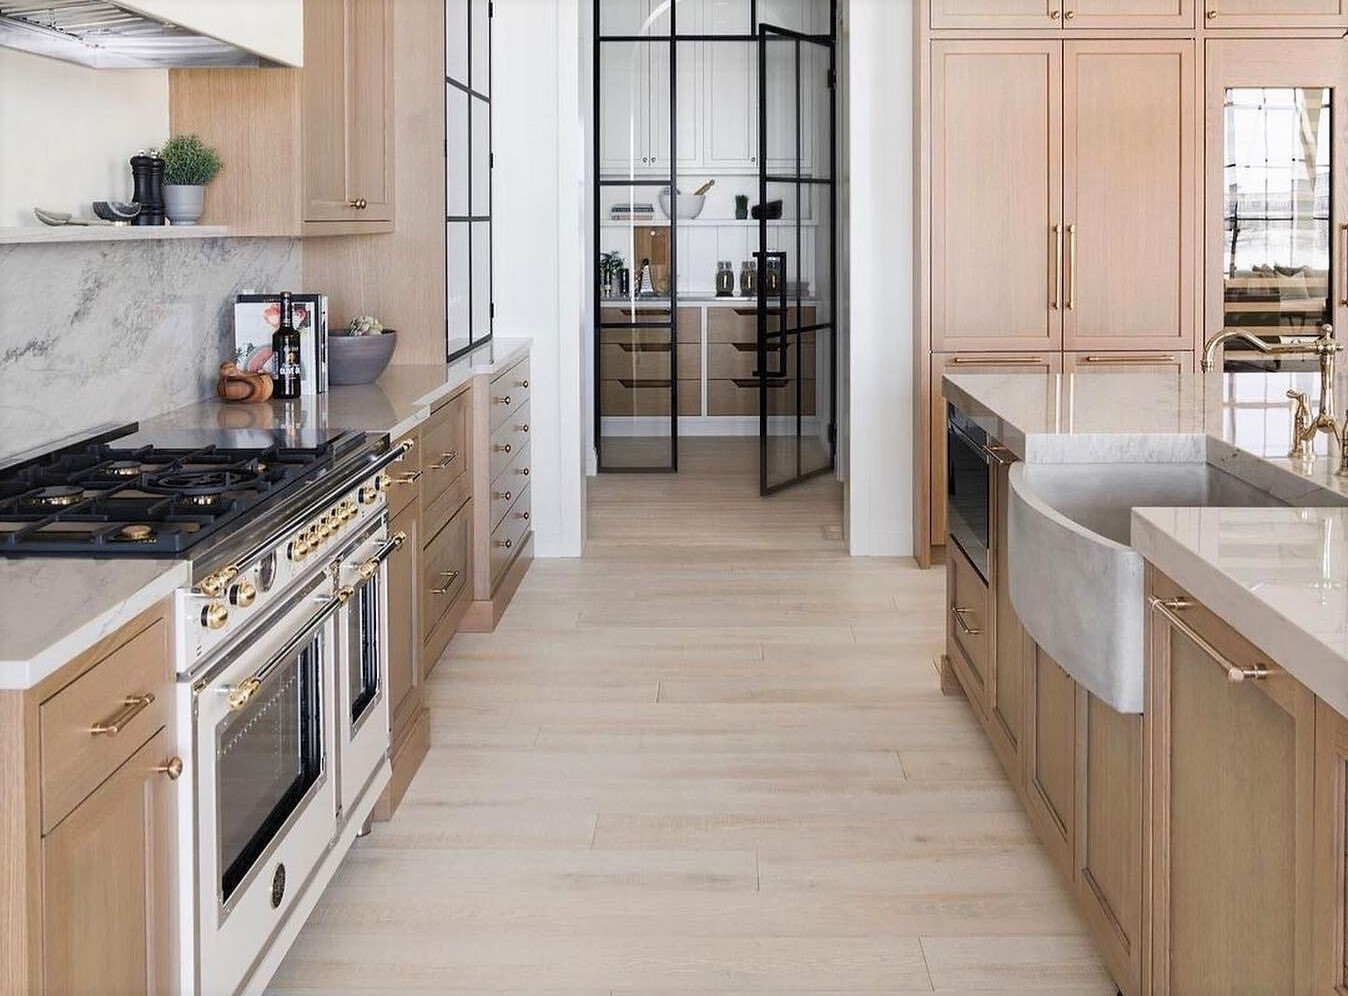 The Case For Two Kitchens: Why You May Want to Splurge On A Prep Kitchen